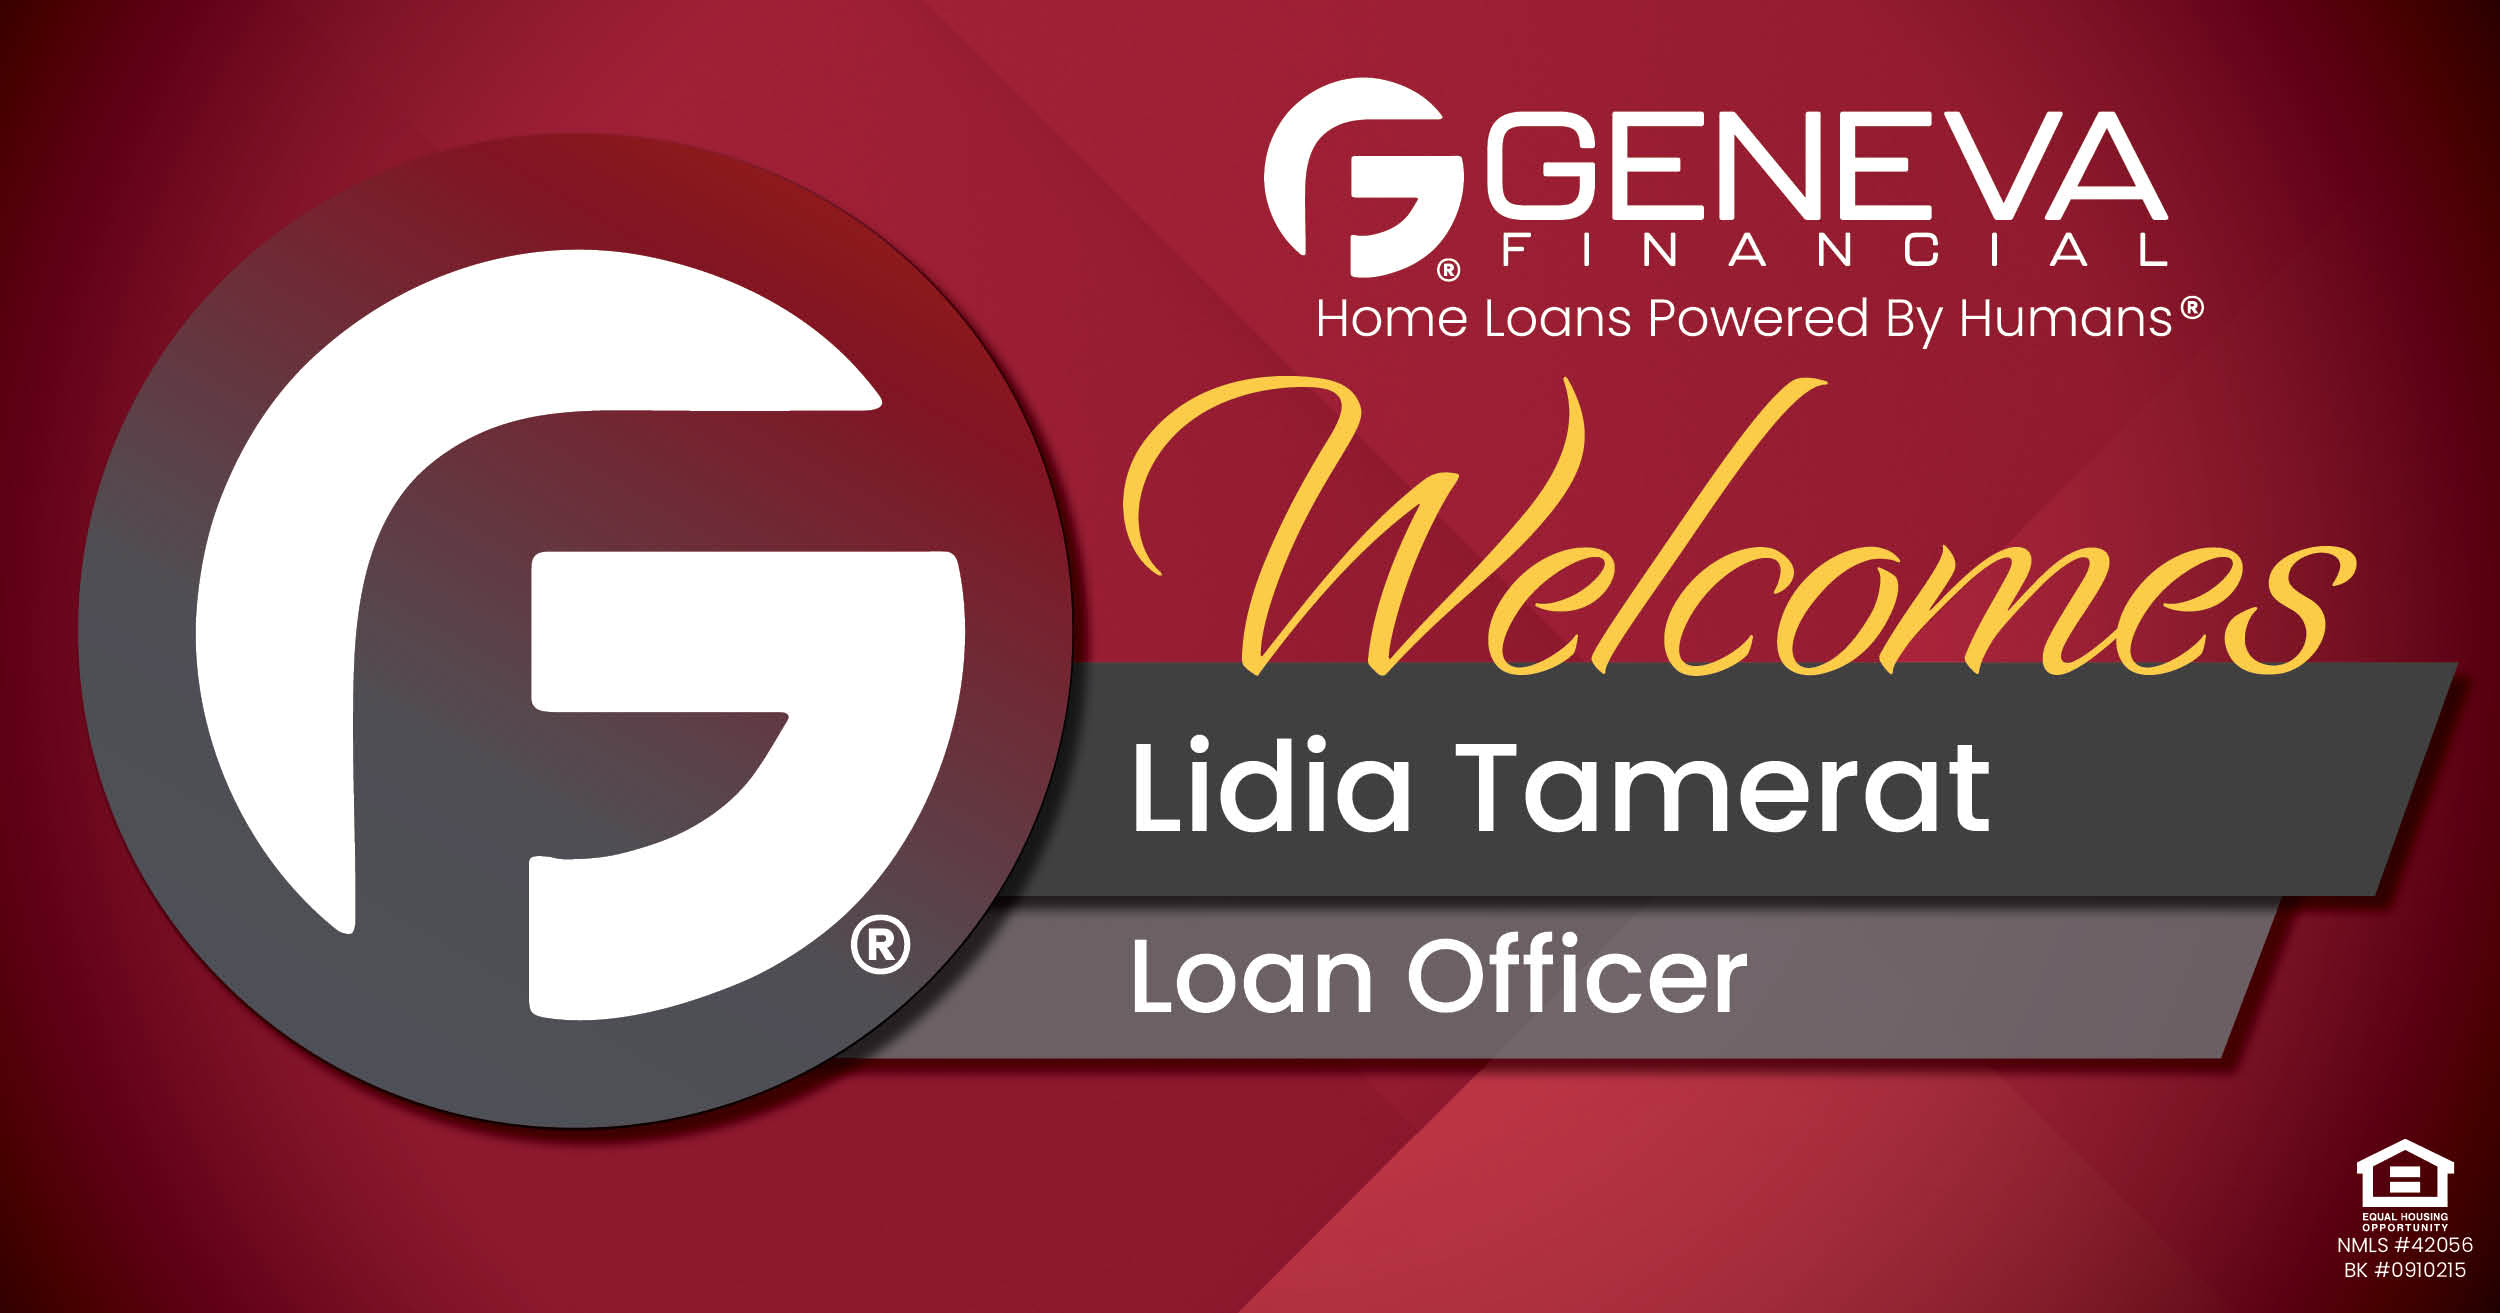 Geneva Financial Welcomes New Loan Officer Lidia Tamerat to the Colorado Market – Home Loans Powered by Humans®.